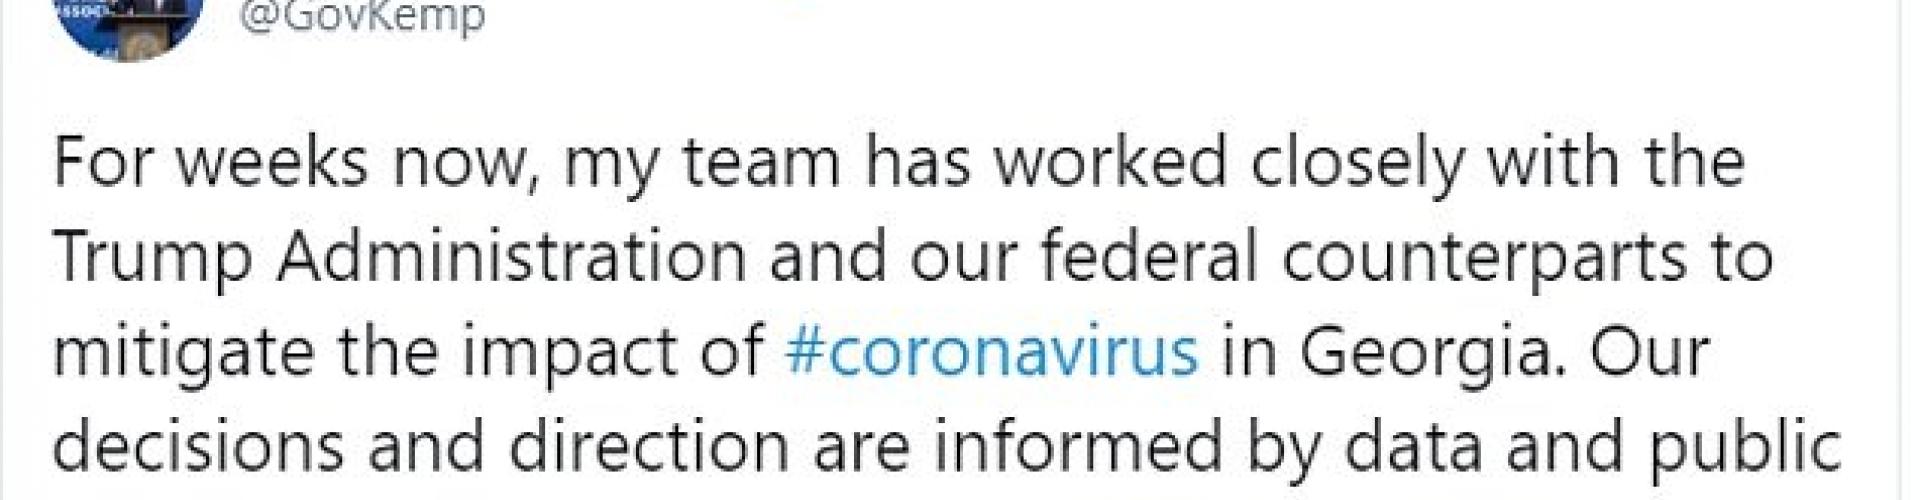 Georgia becomes one of the first states to reopen after coronavirus